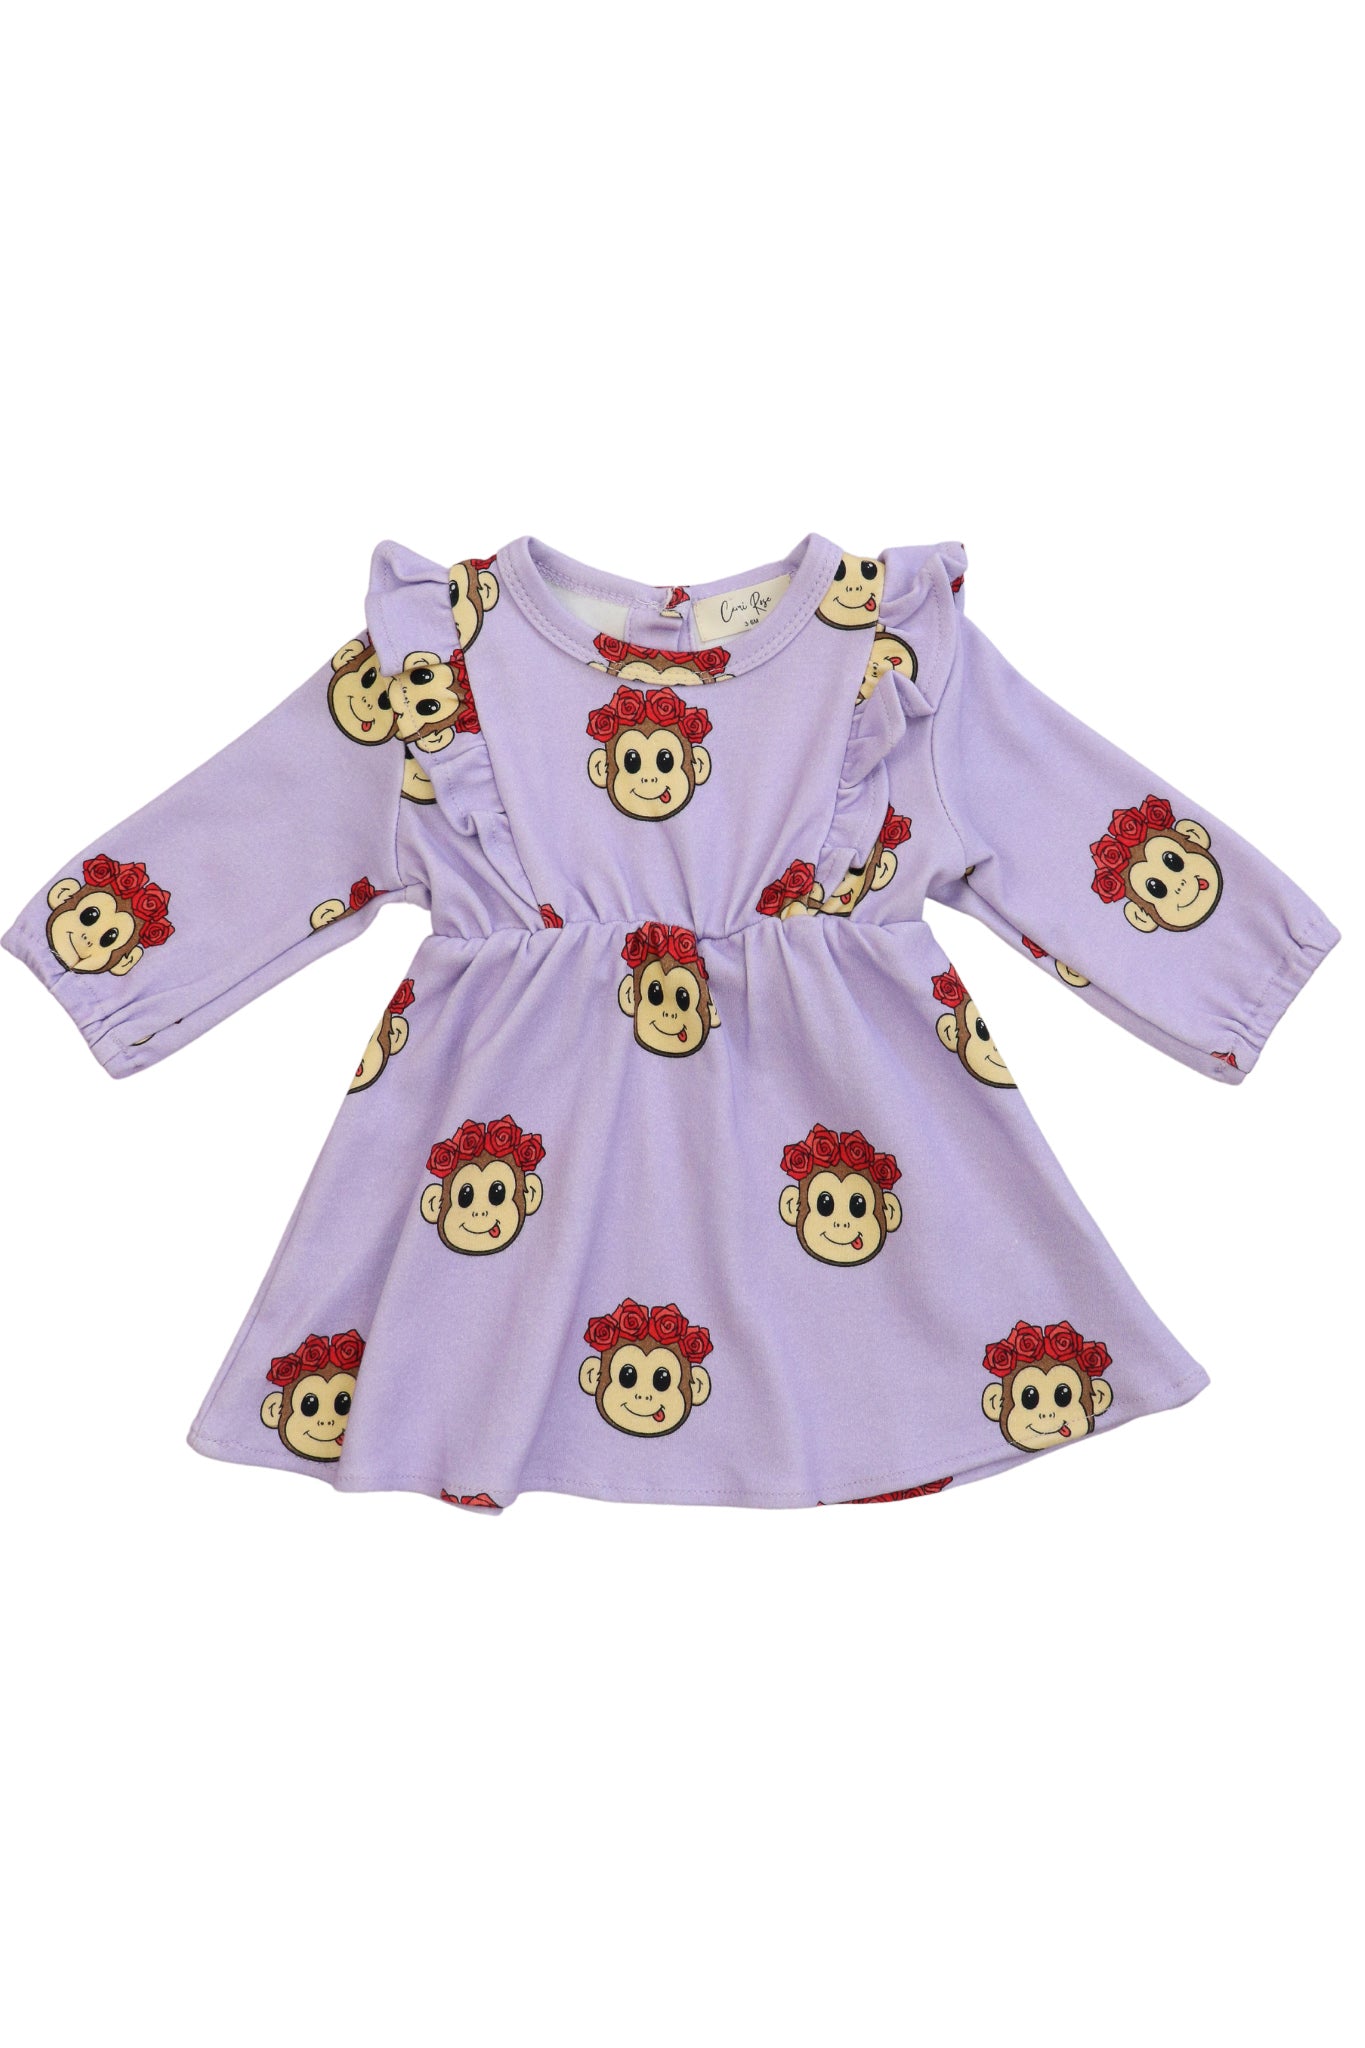 baby girl pastel purple dress with cute monkey faces all over and frill shoulder detail